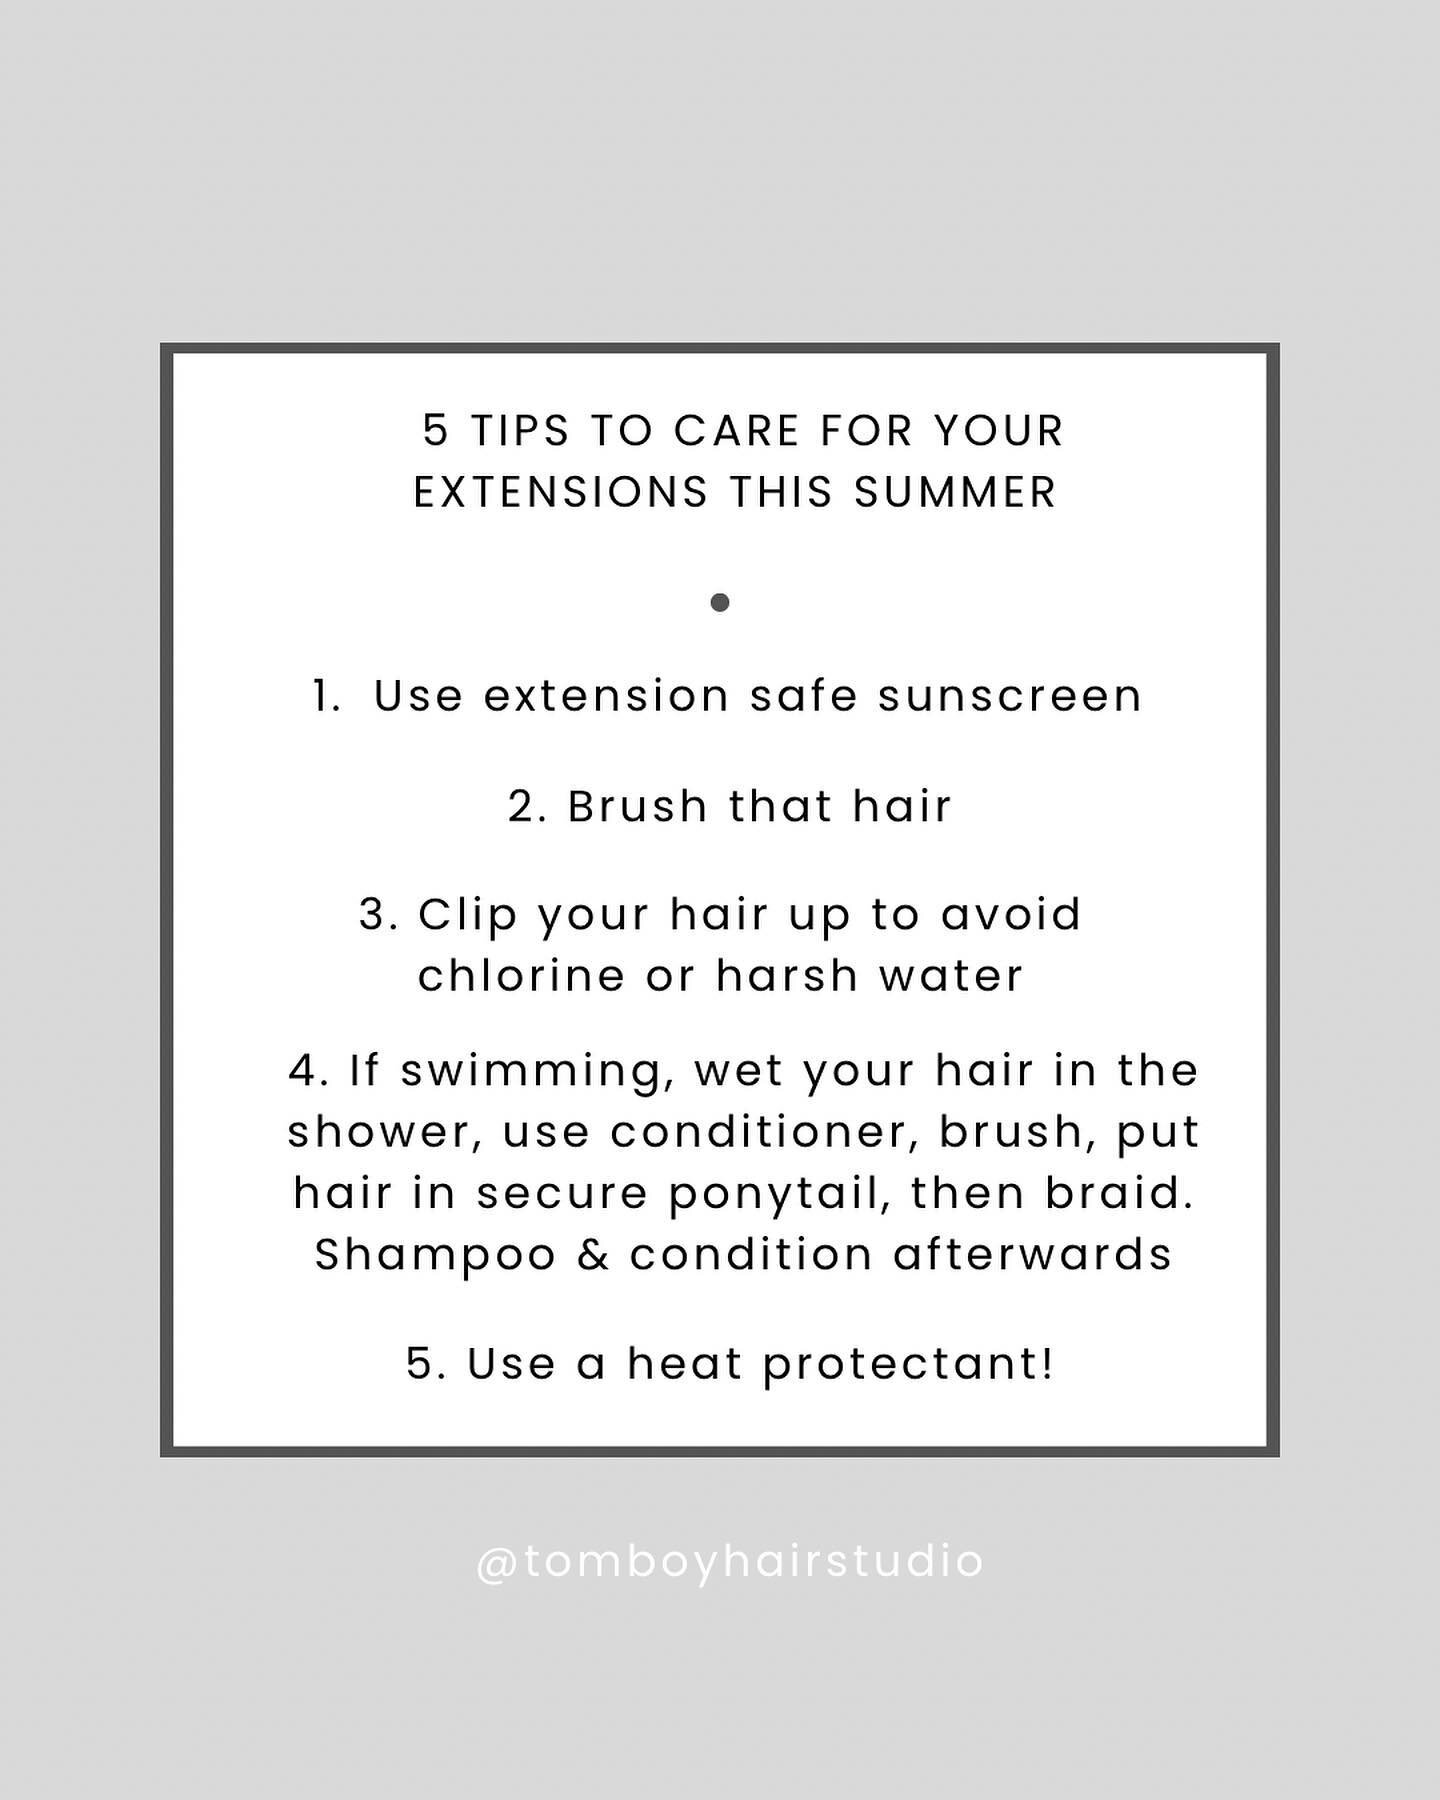 5 tips to care for your extensions this summer: 

1. Use extension safe sunscreen - shop our fave from @getgoldielocks at your next visit
2. Brush that hair - separate your rows to brush thoroughly
3. Clip your hair up to avoid chlorine or harsh wate